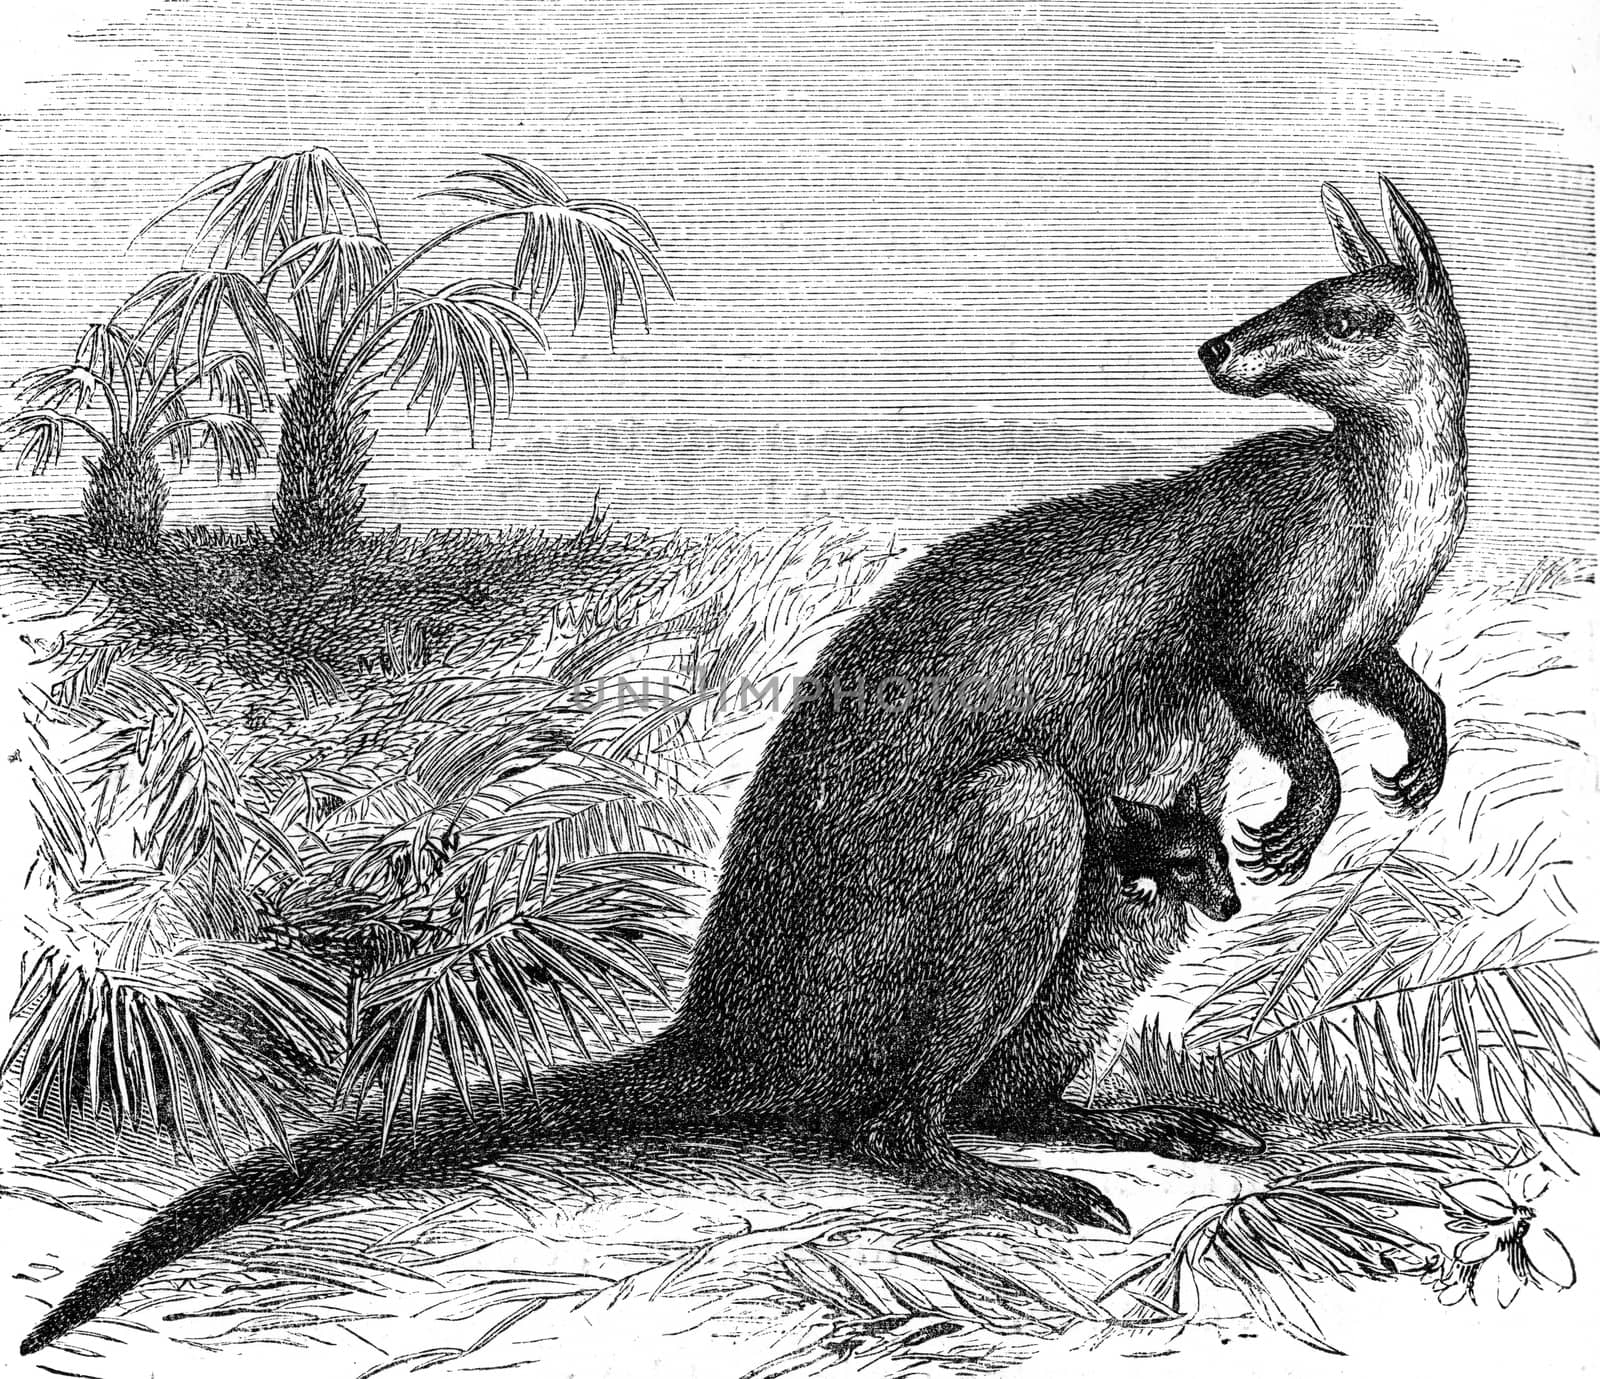 Giant Kangaroo rat, vintage engraved illustration. From Zoology Elements from Paul Gervais.
